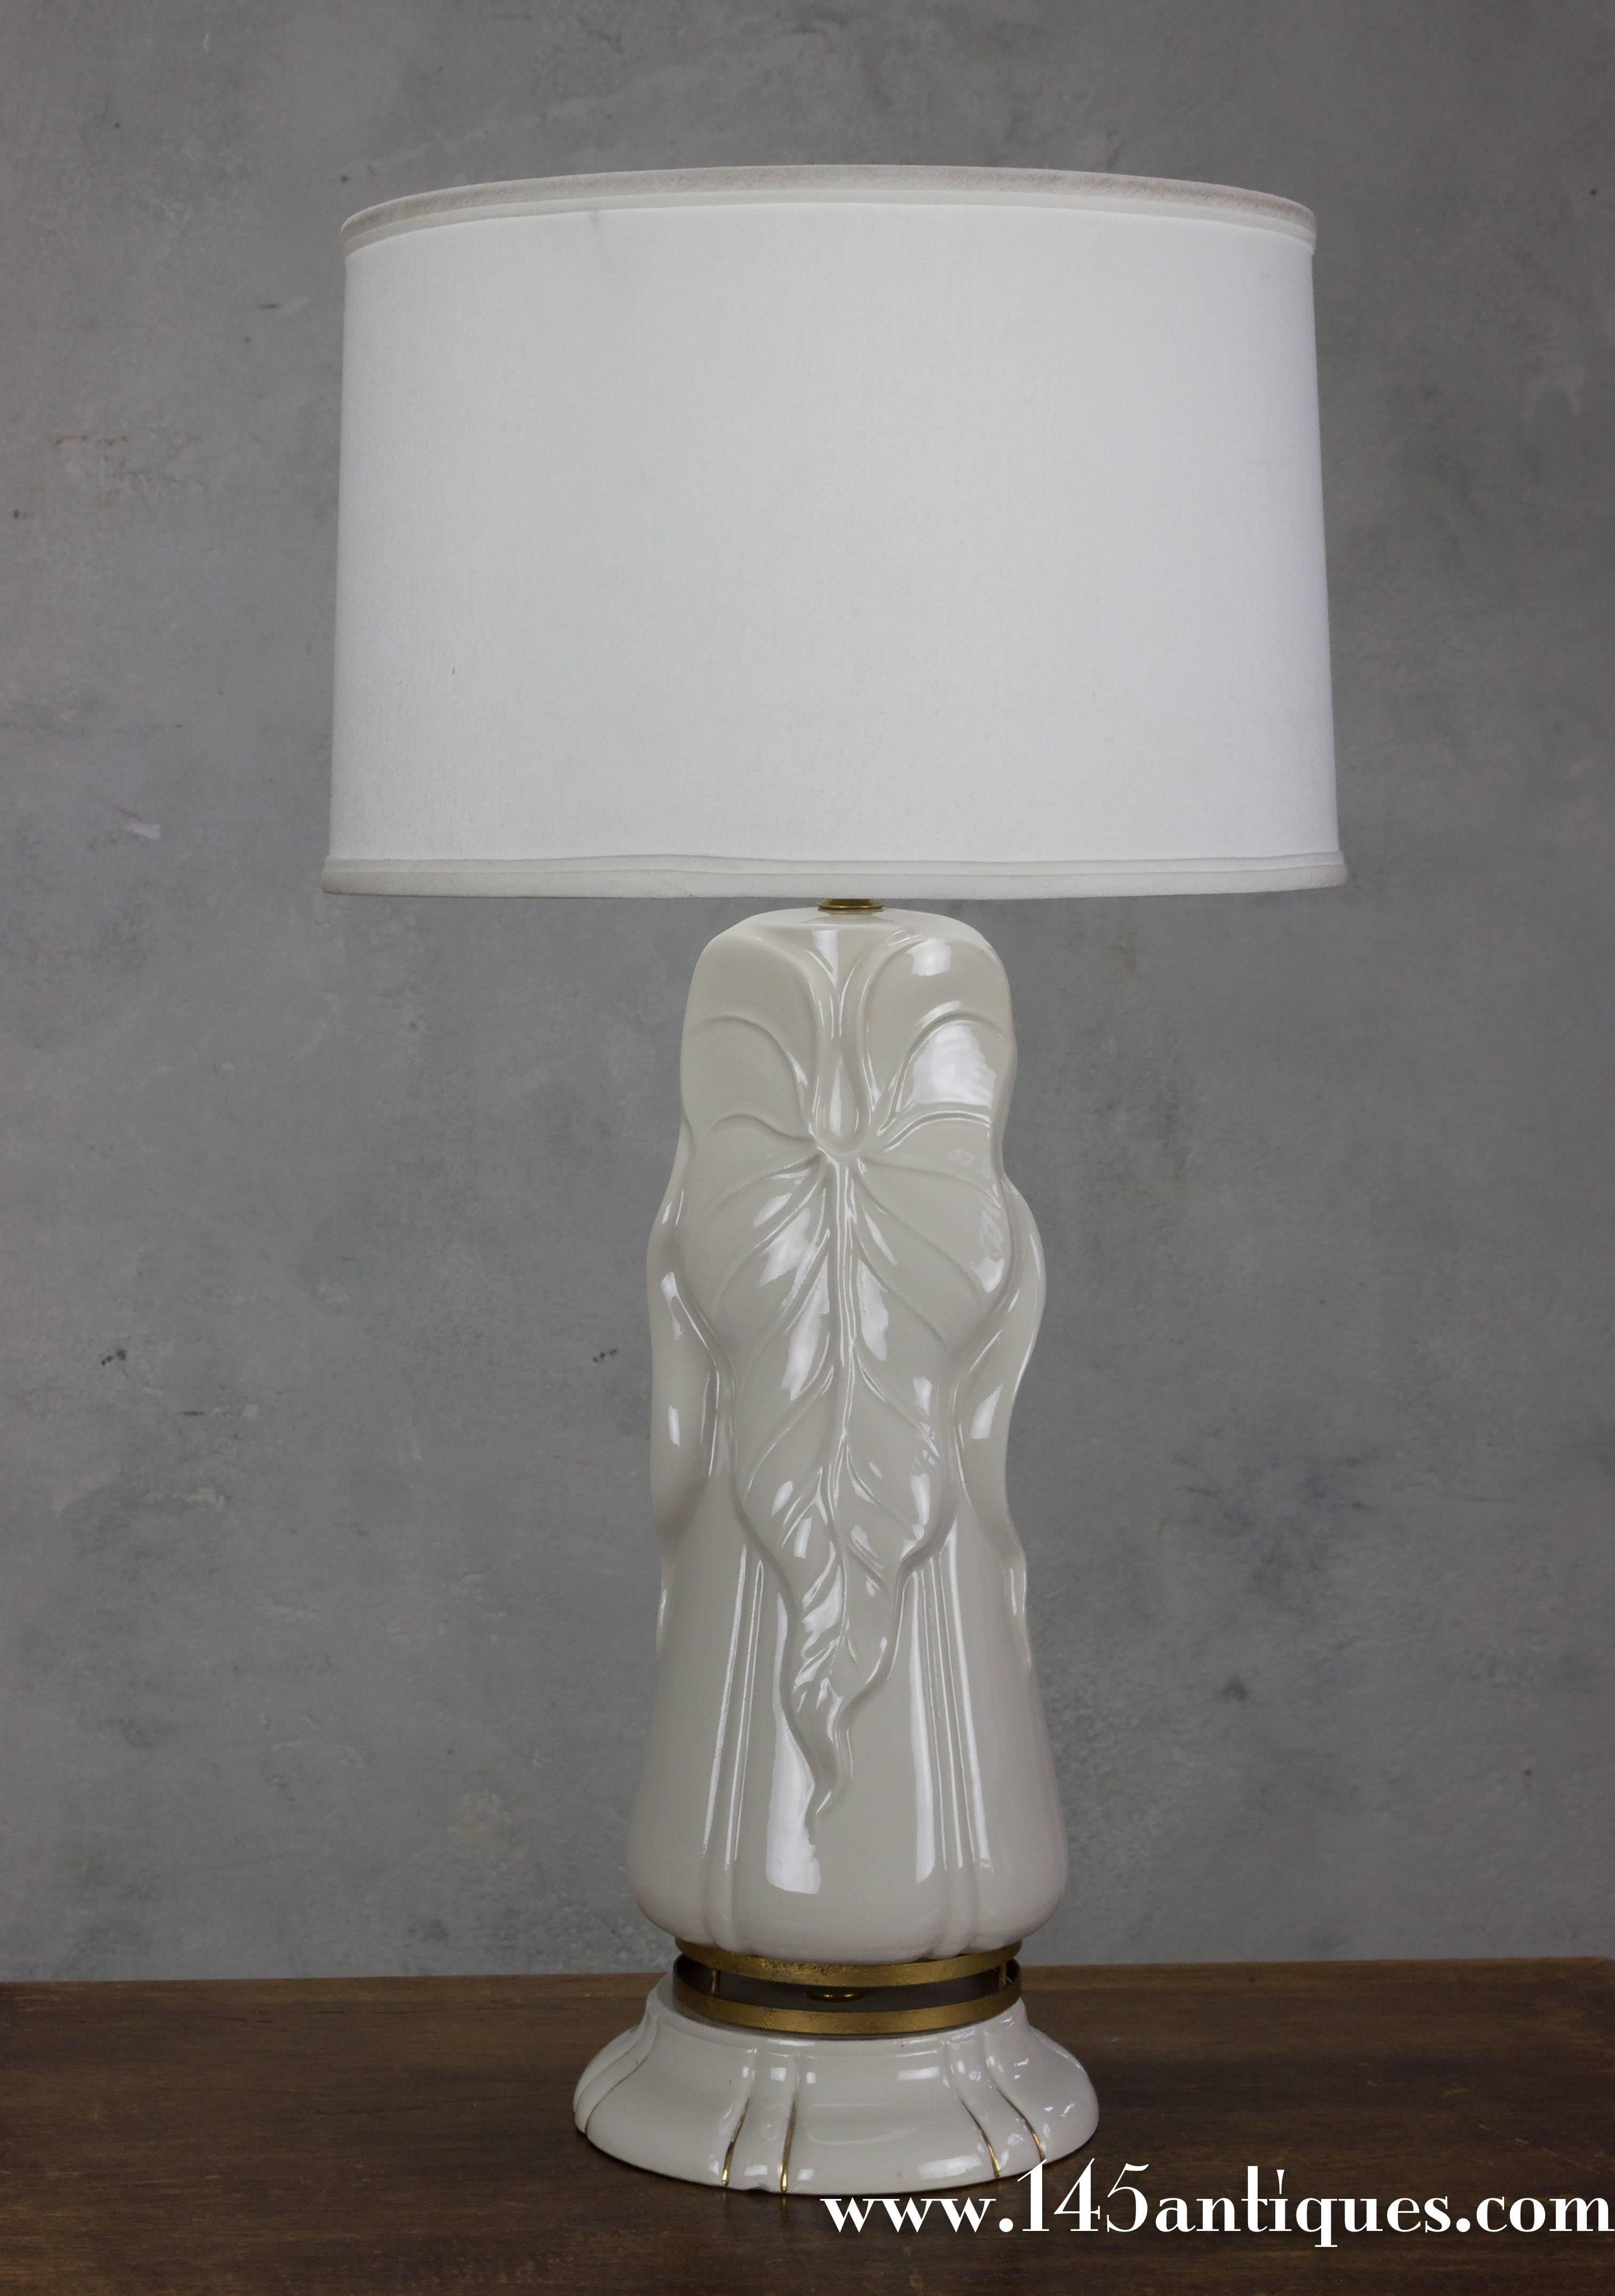 Mid-20th Century Pair of 1940s Hollywood Glam White Ceramic Lamps With Gold Metal Trim For Sale